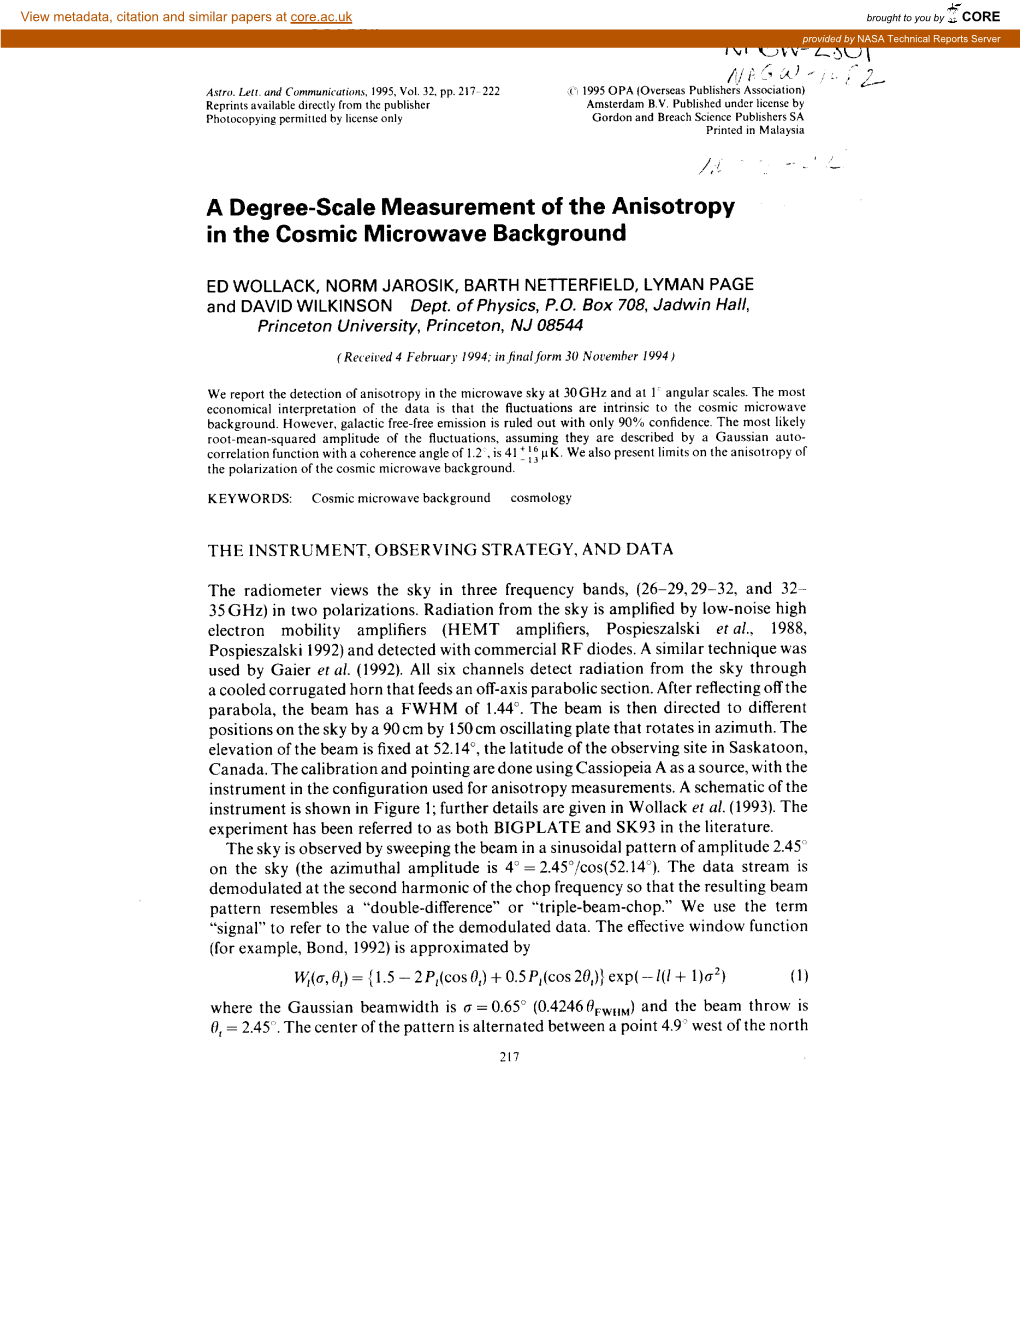 A Degree-Scale Measurement of the Anisotropy in the Cosmic Microwave Background